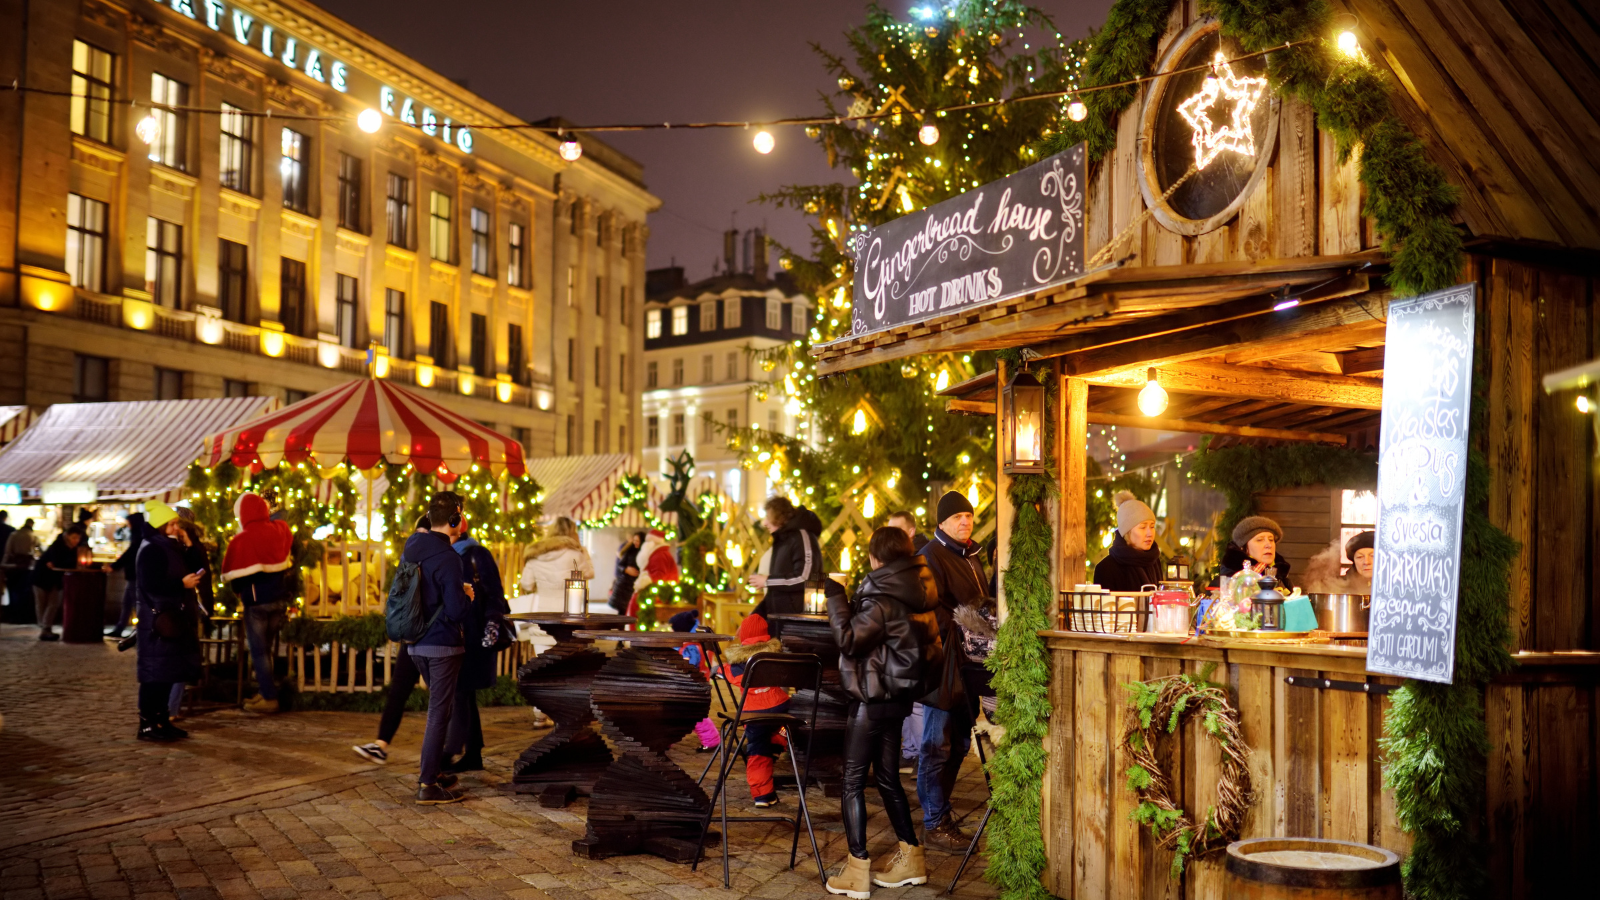 Travel to France in 4 seasons trip in winter - Christmas markets